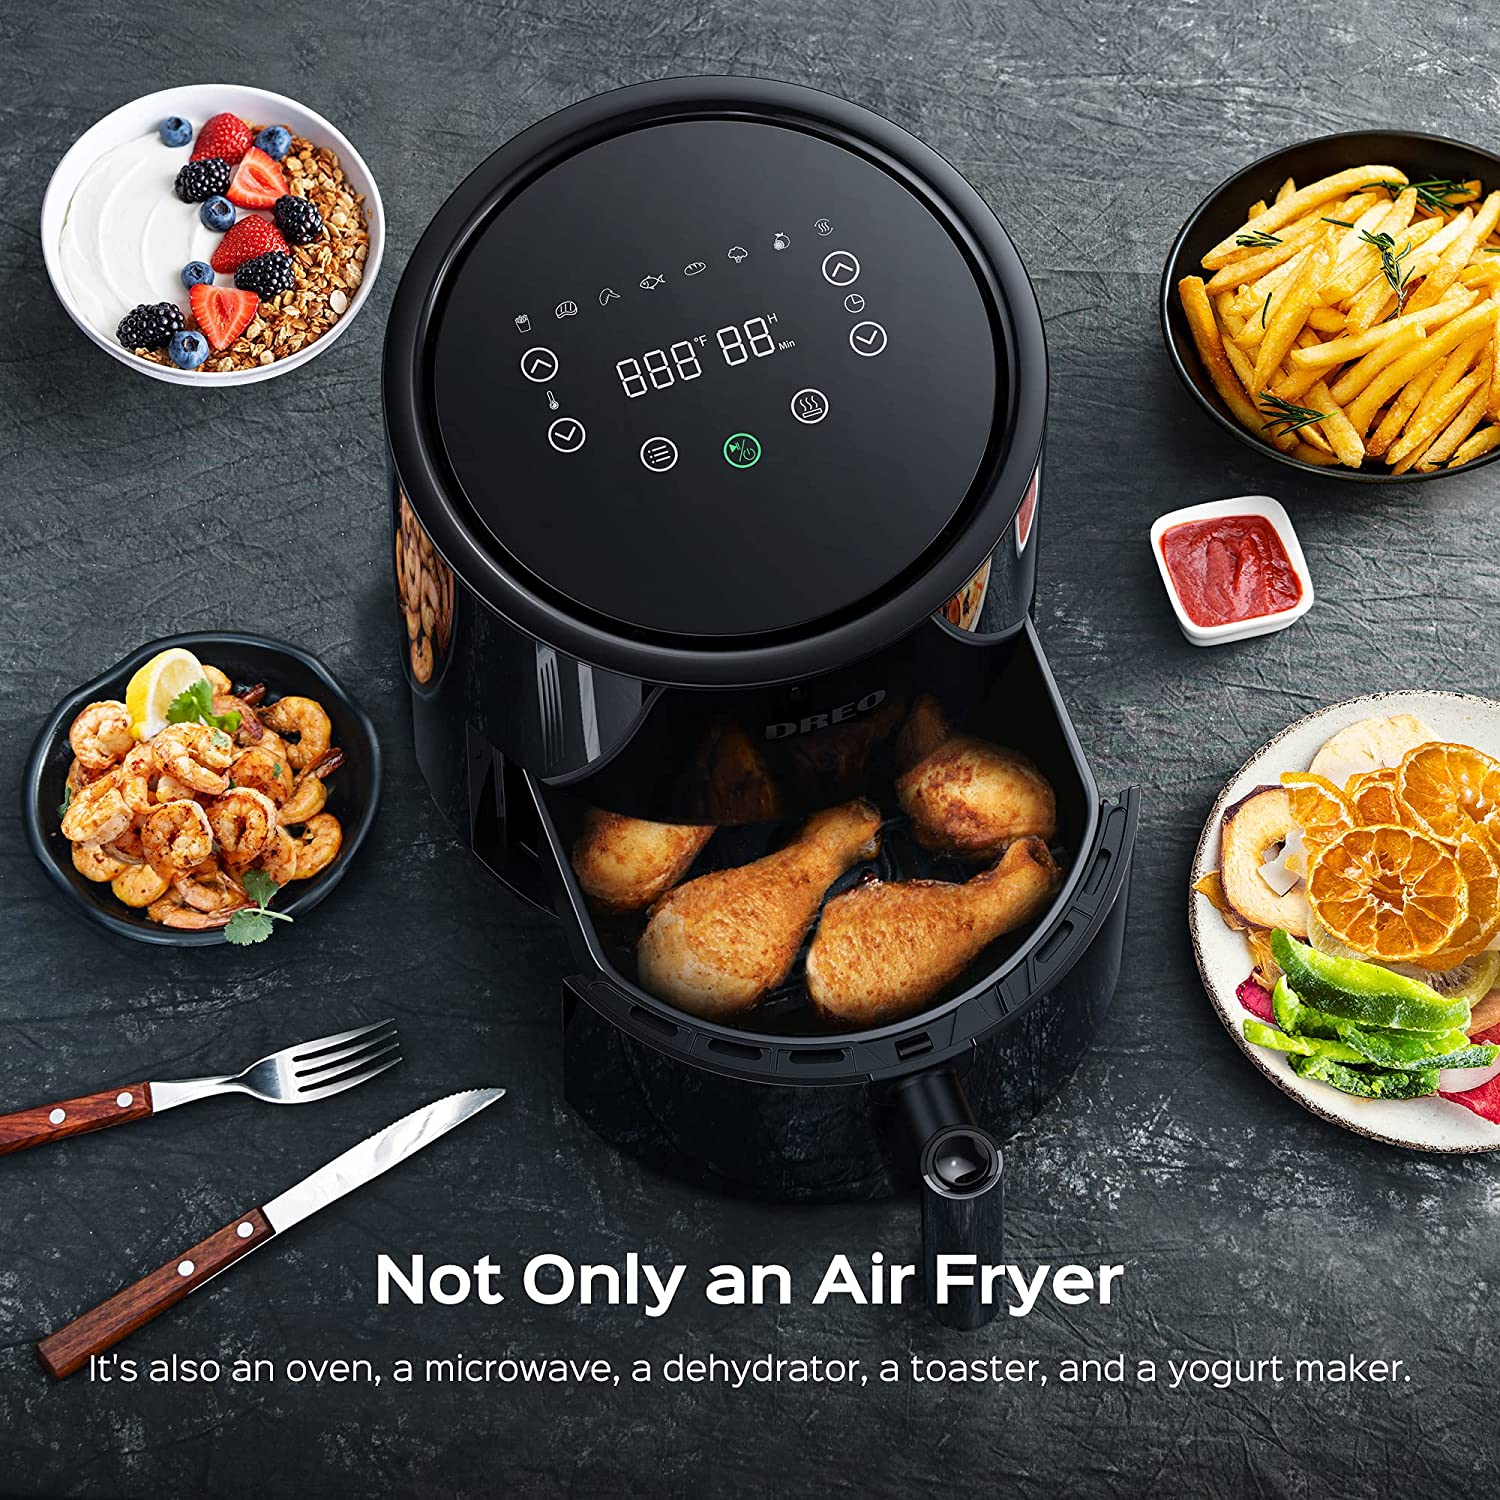 Dreo Air Fryer - 100°F to 450°F, 4 Quart Hot Oven Cooker with 50 Recipes